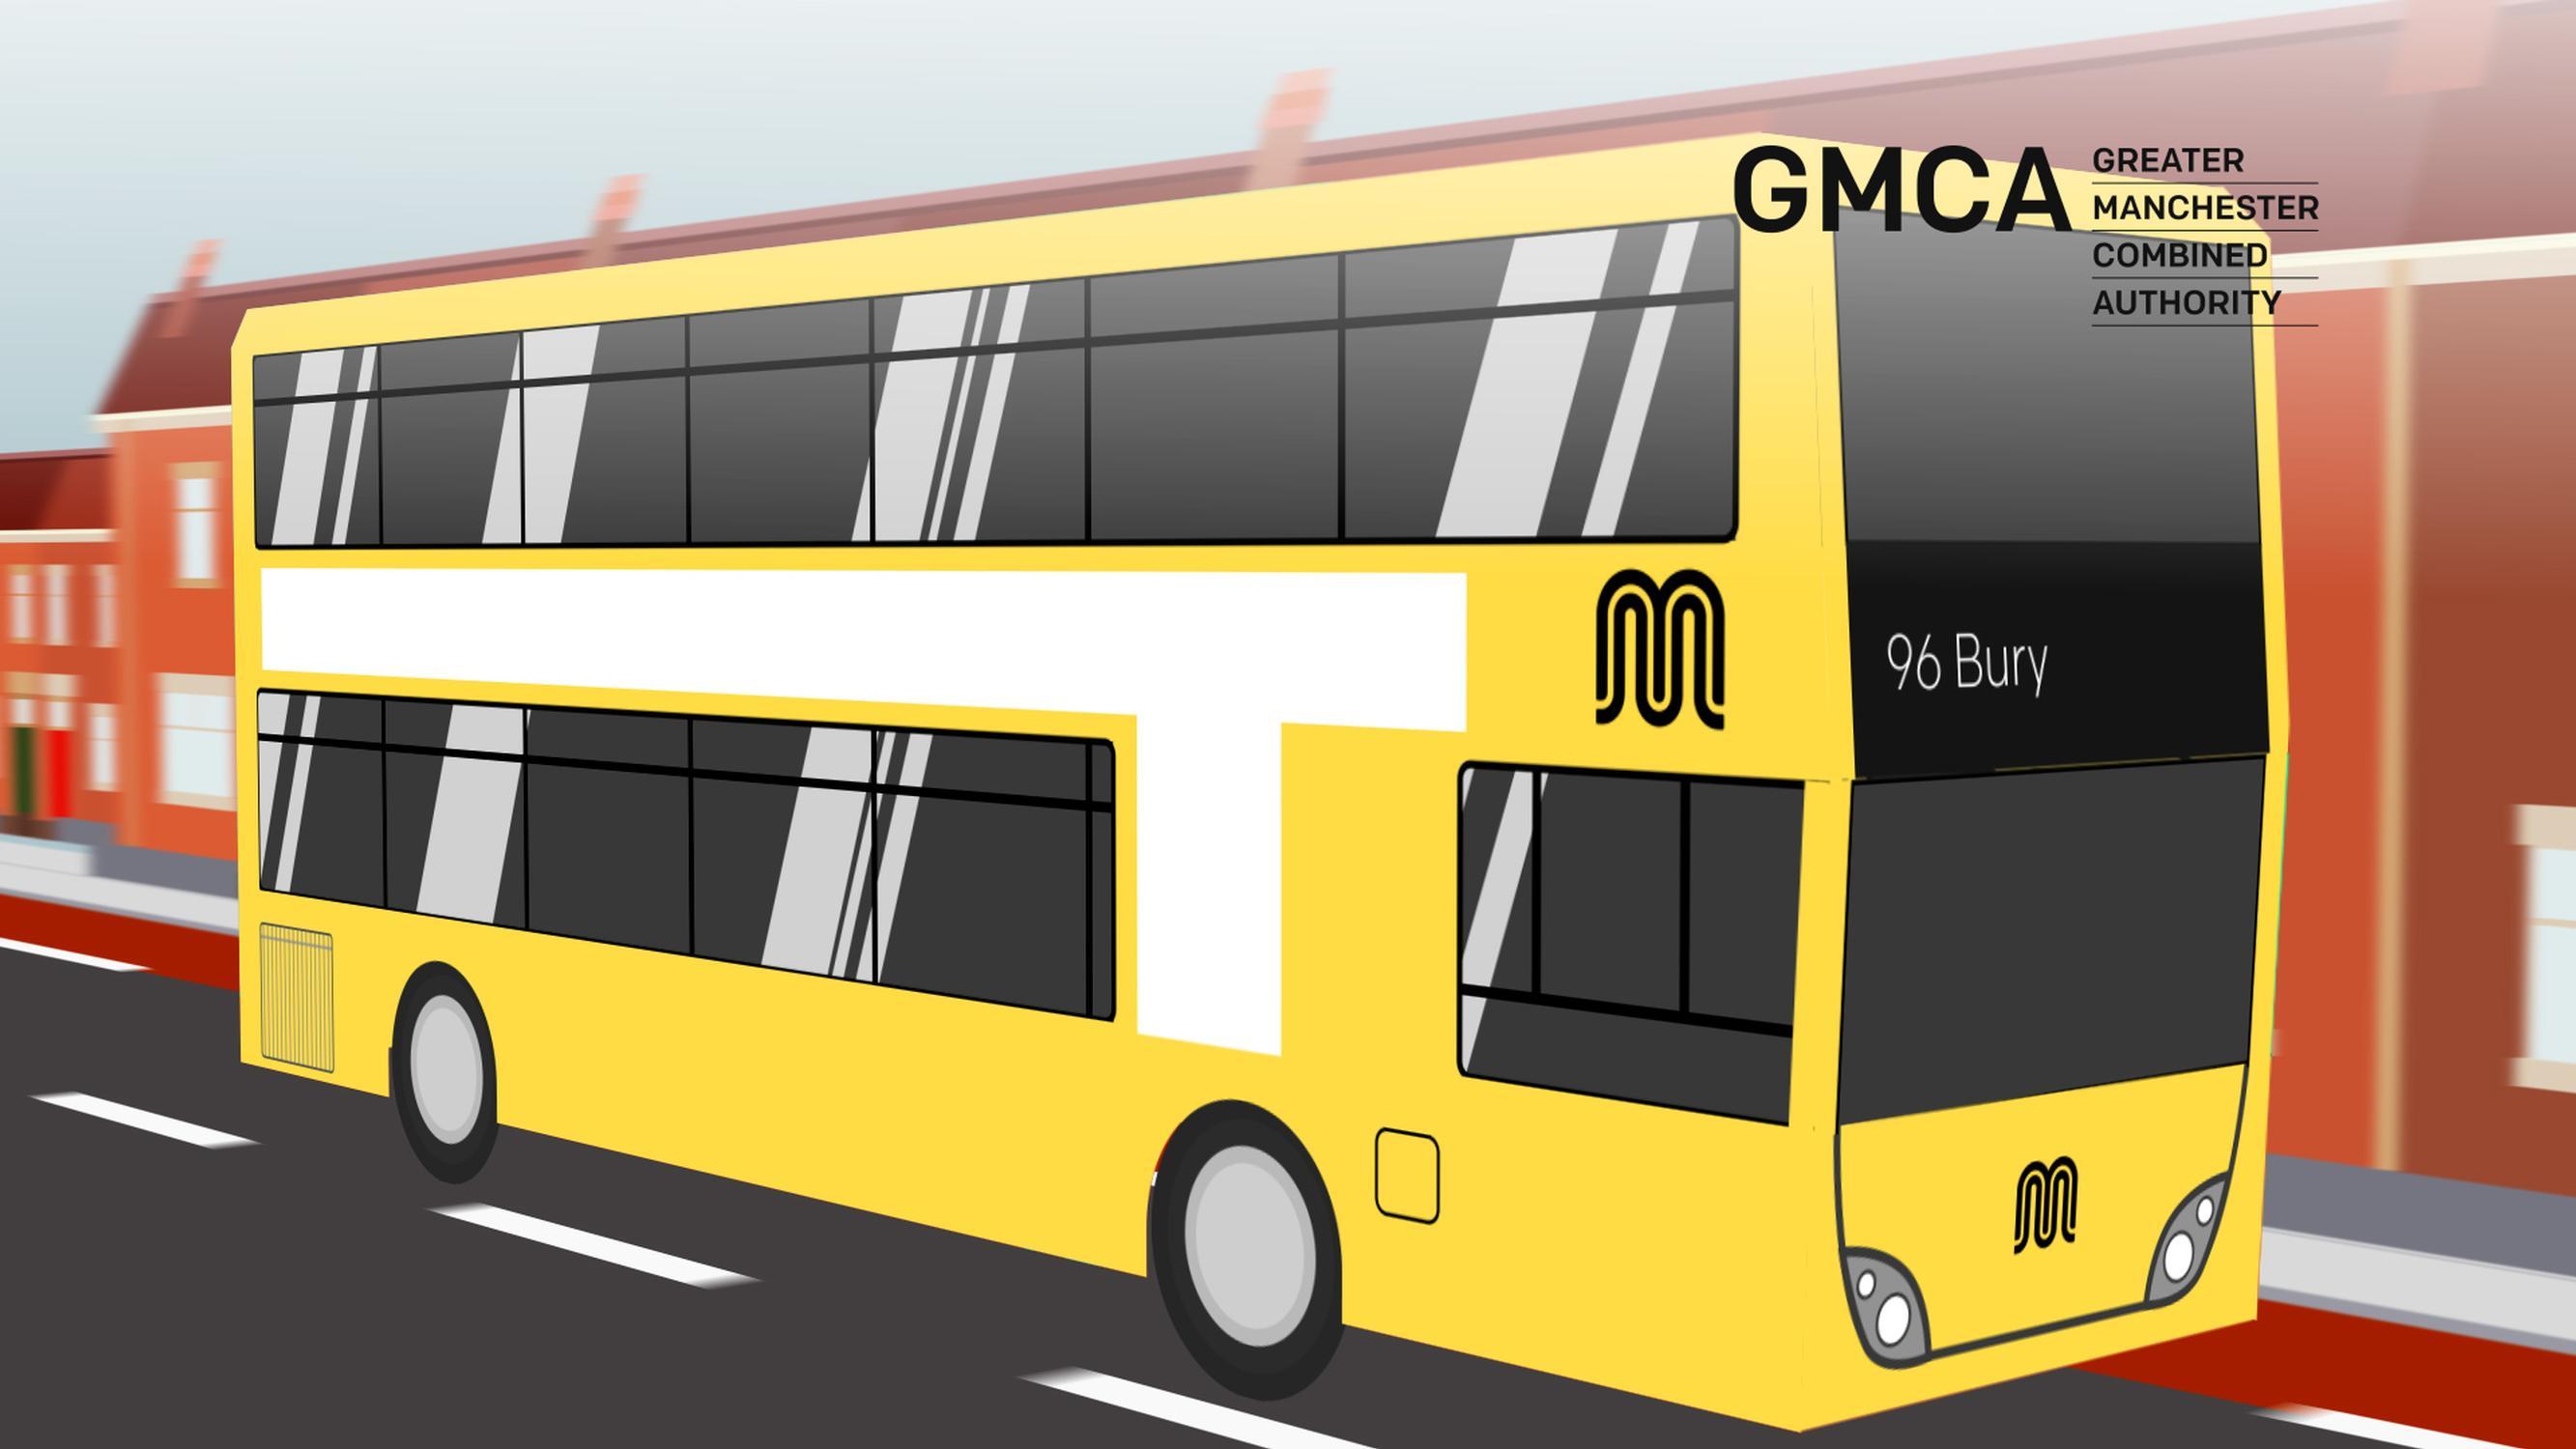 GMCA plans to develop a new identity for Greater Manchester’s transport network